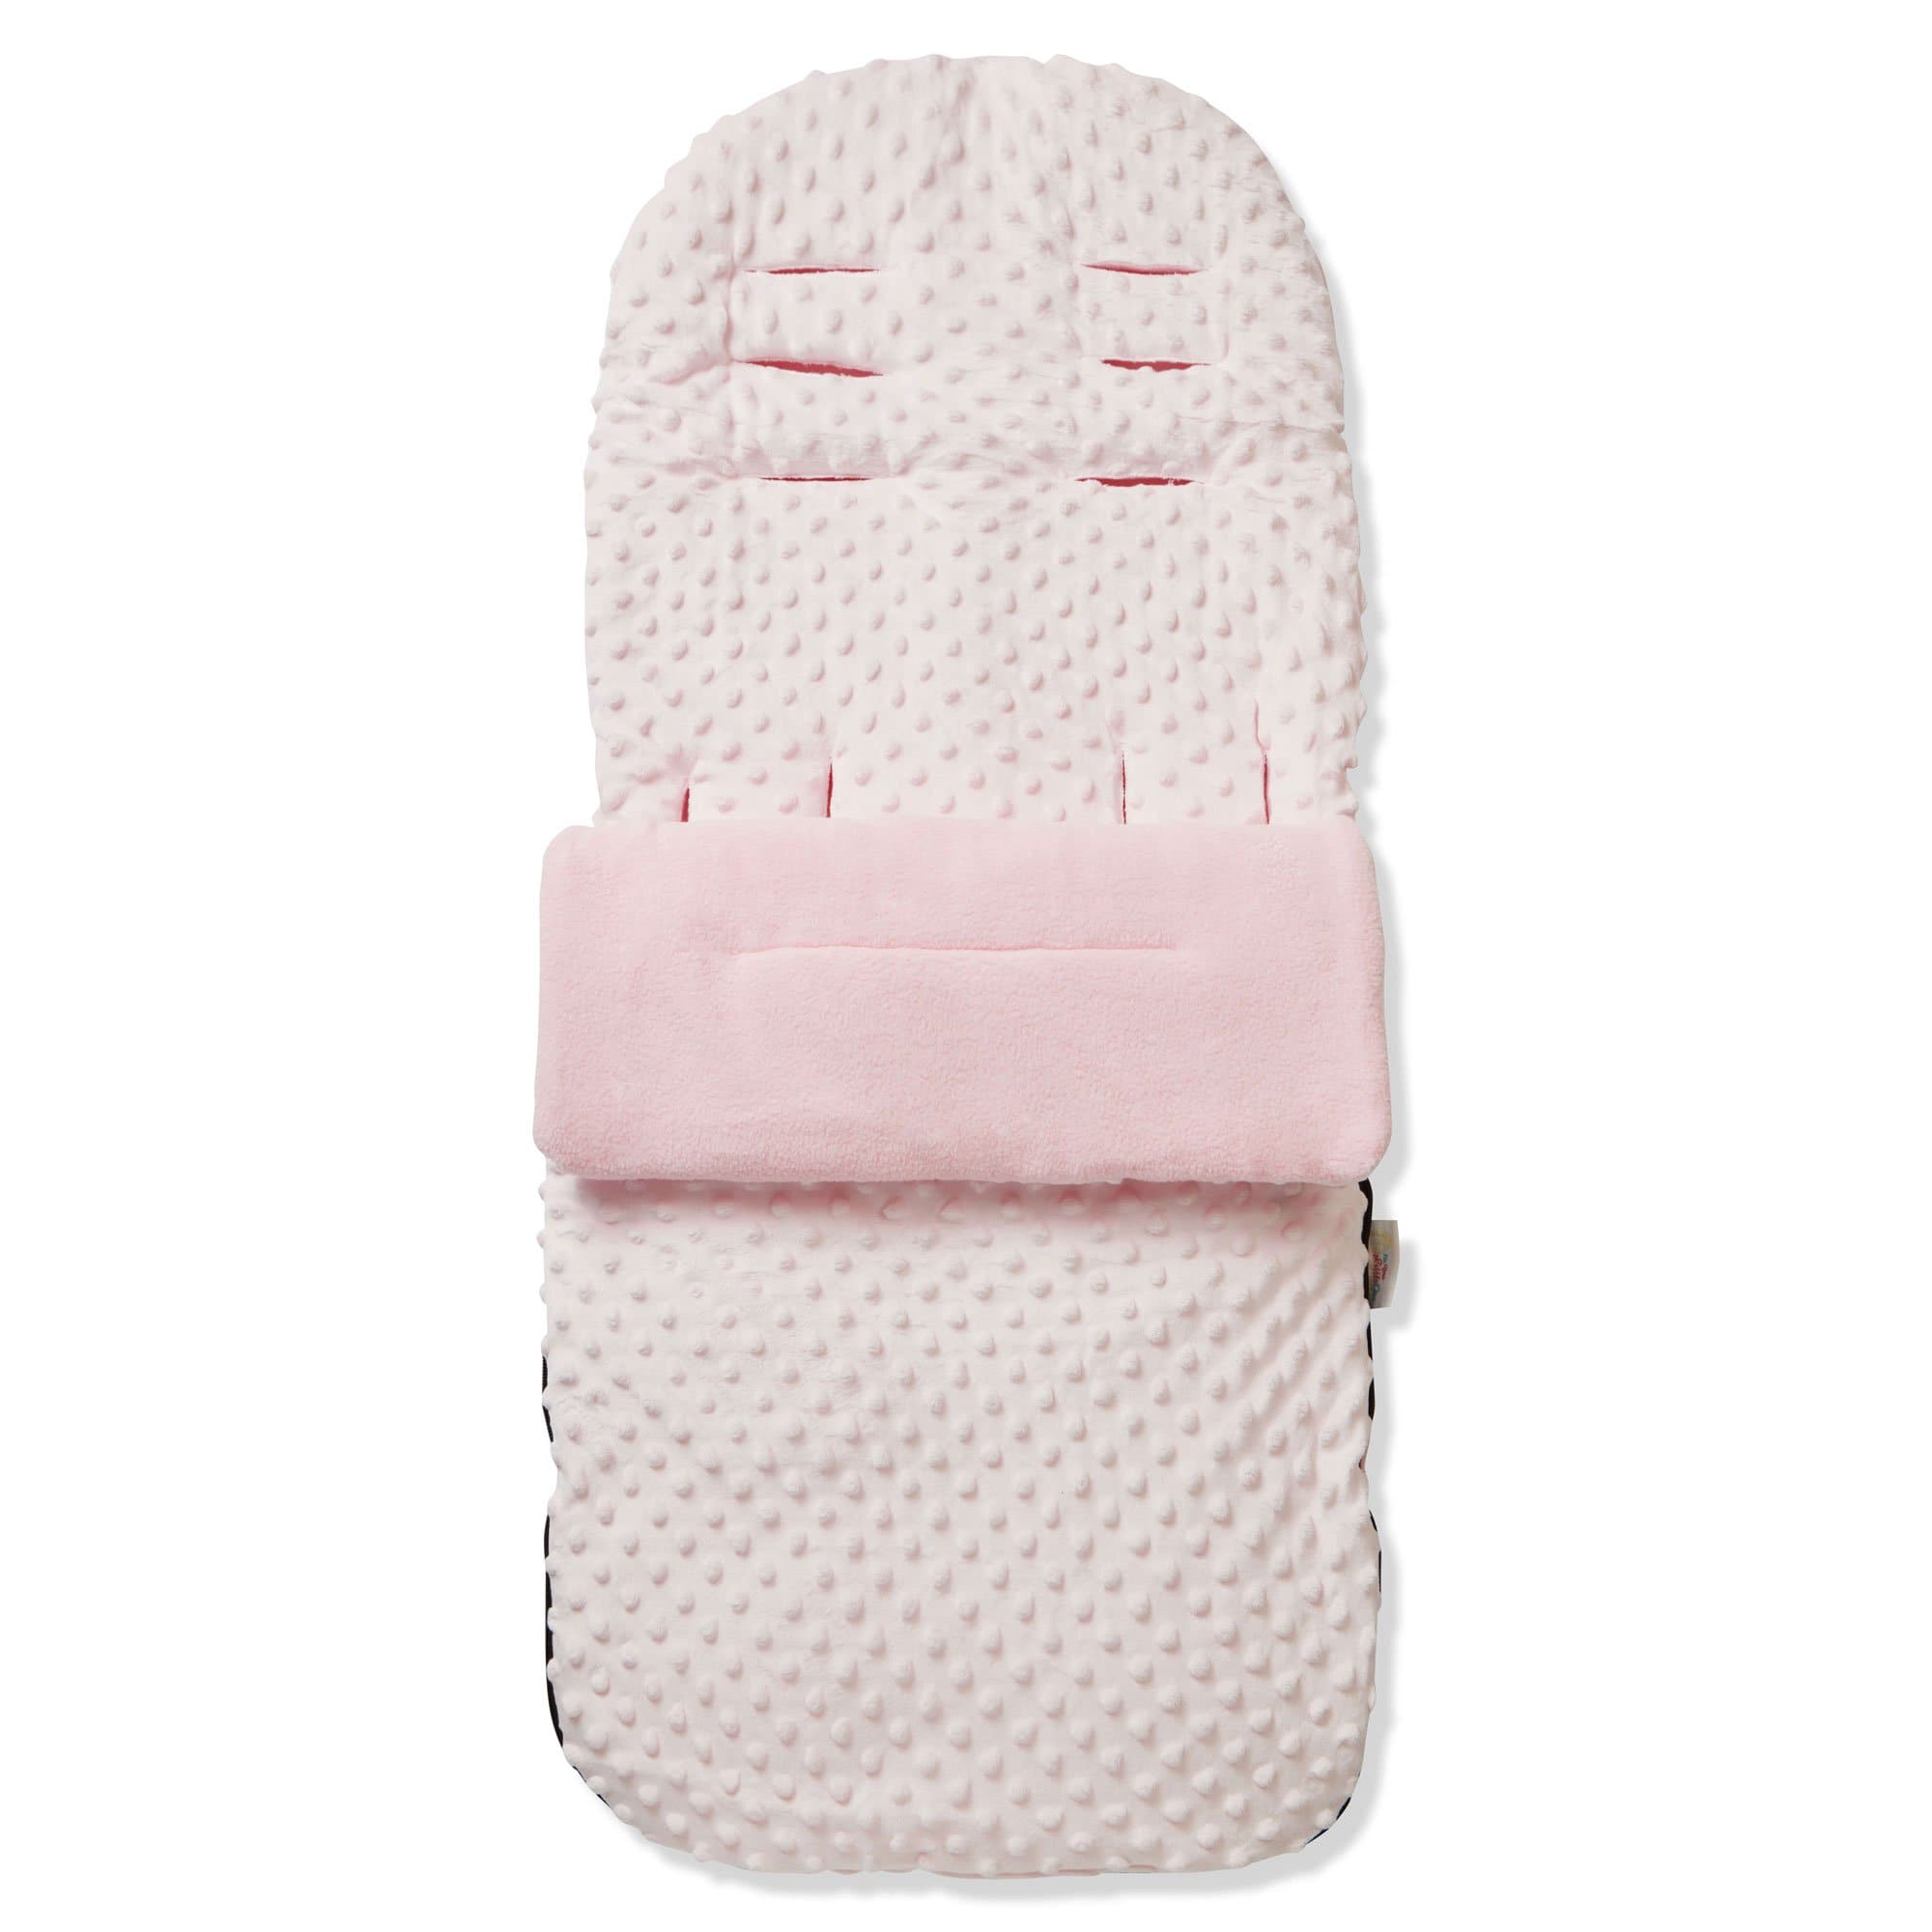 Dimple Footmuff / Cosy Toes Compatible with Bebecar - Pink / Fits All Models | For Your Little One